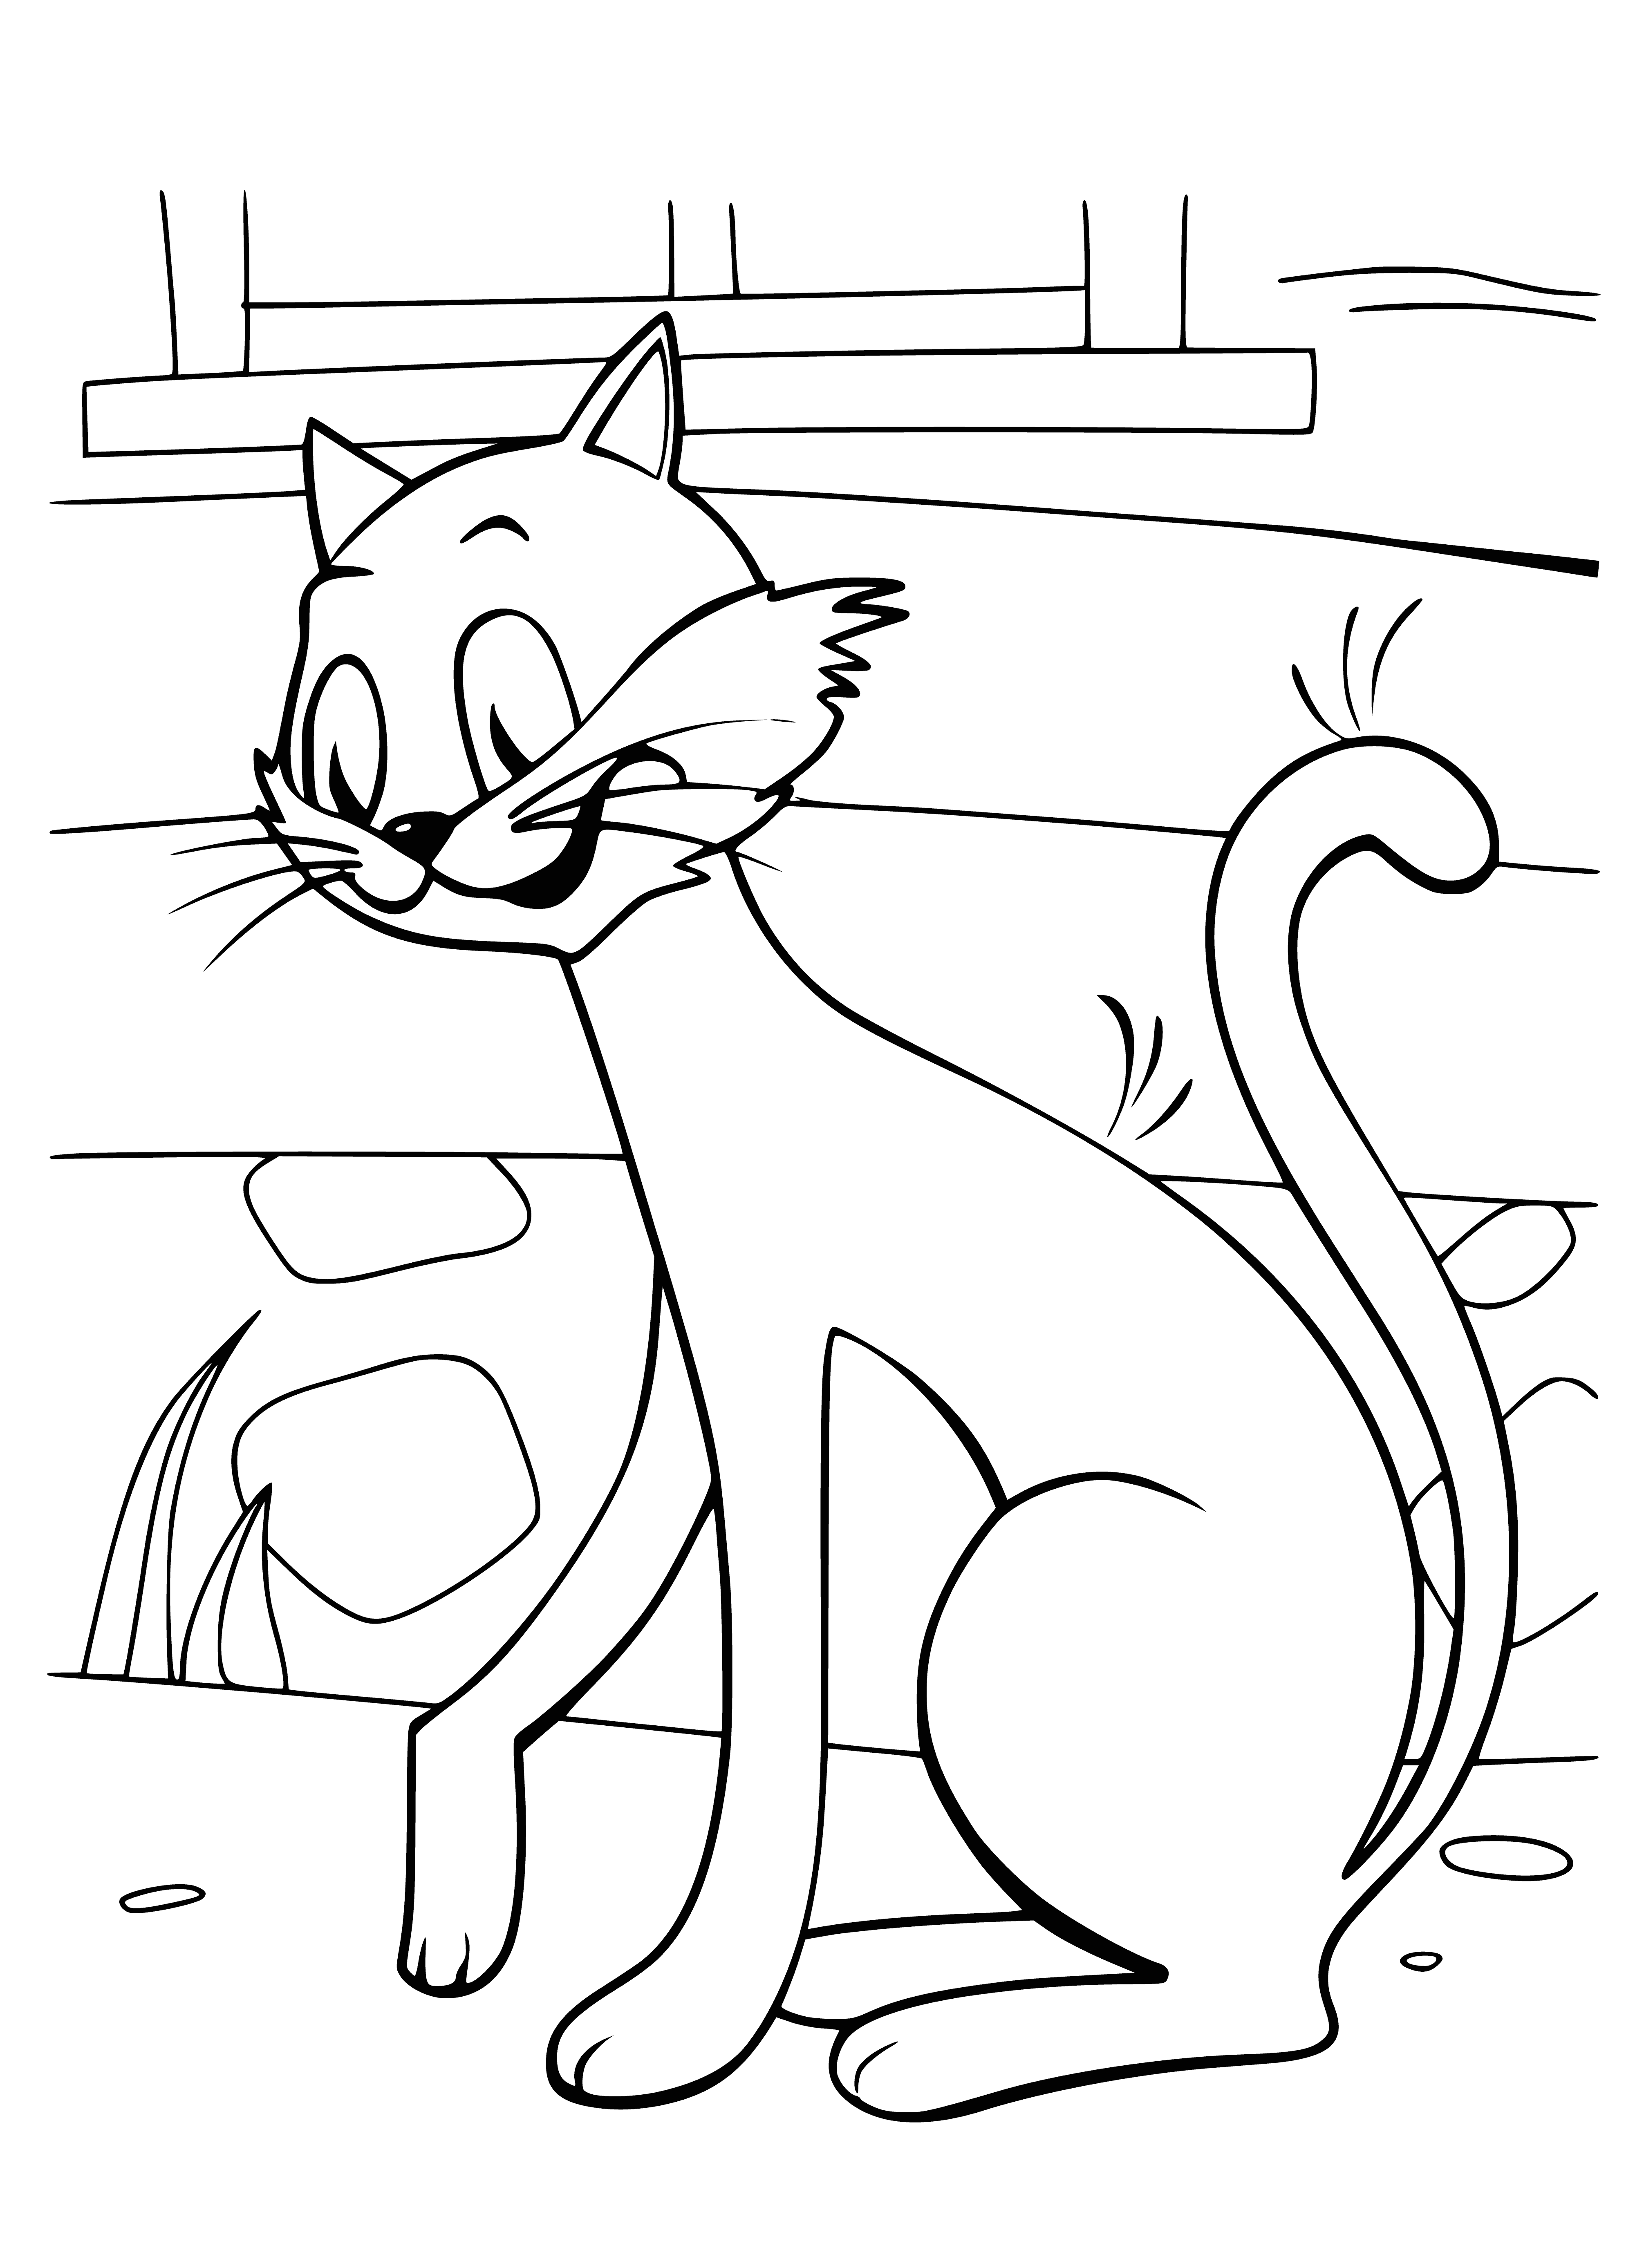 coloring page: Adorable light brown tabby kitten sitting in green grass with yellow flowers around it. White muzzle and front paws.